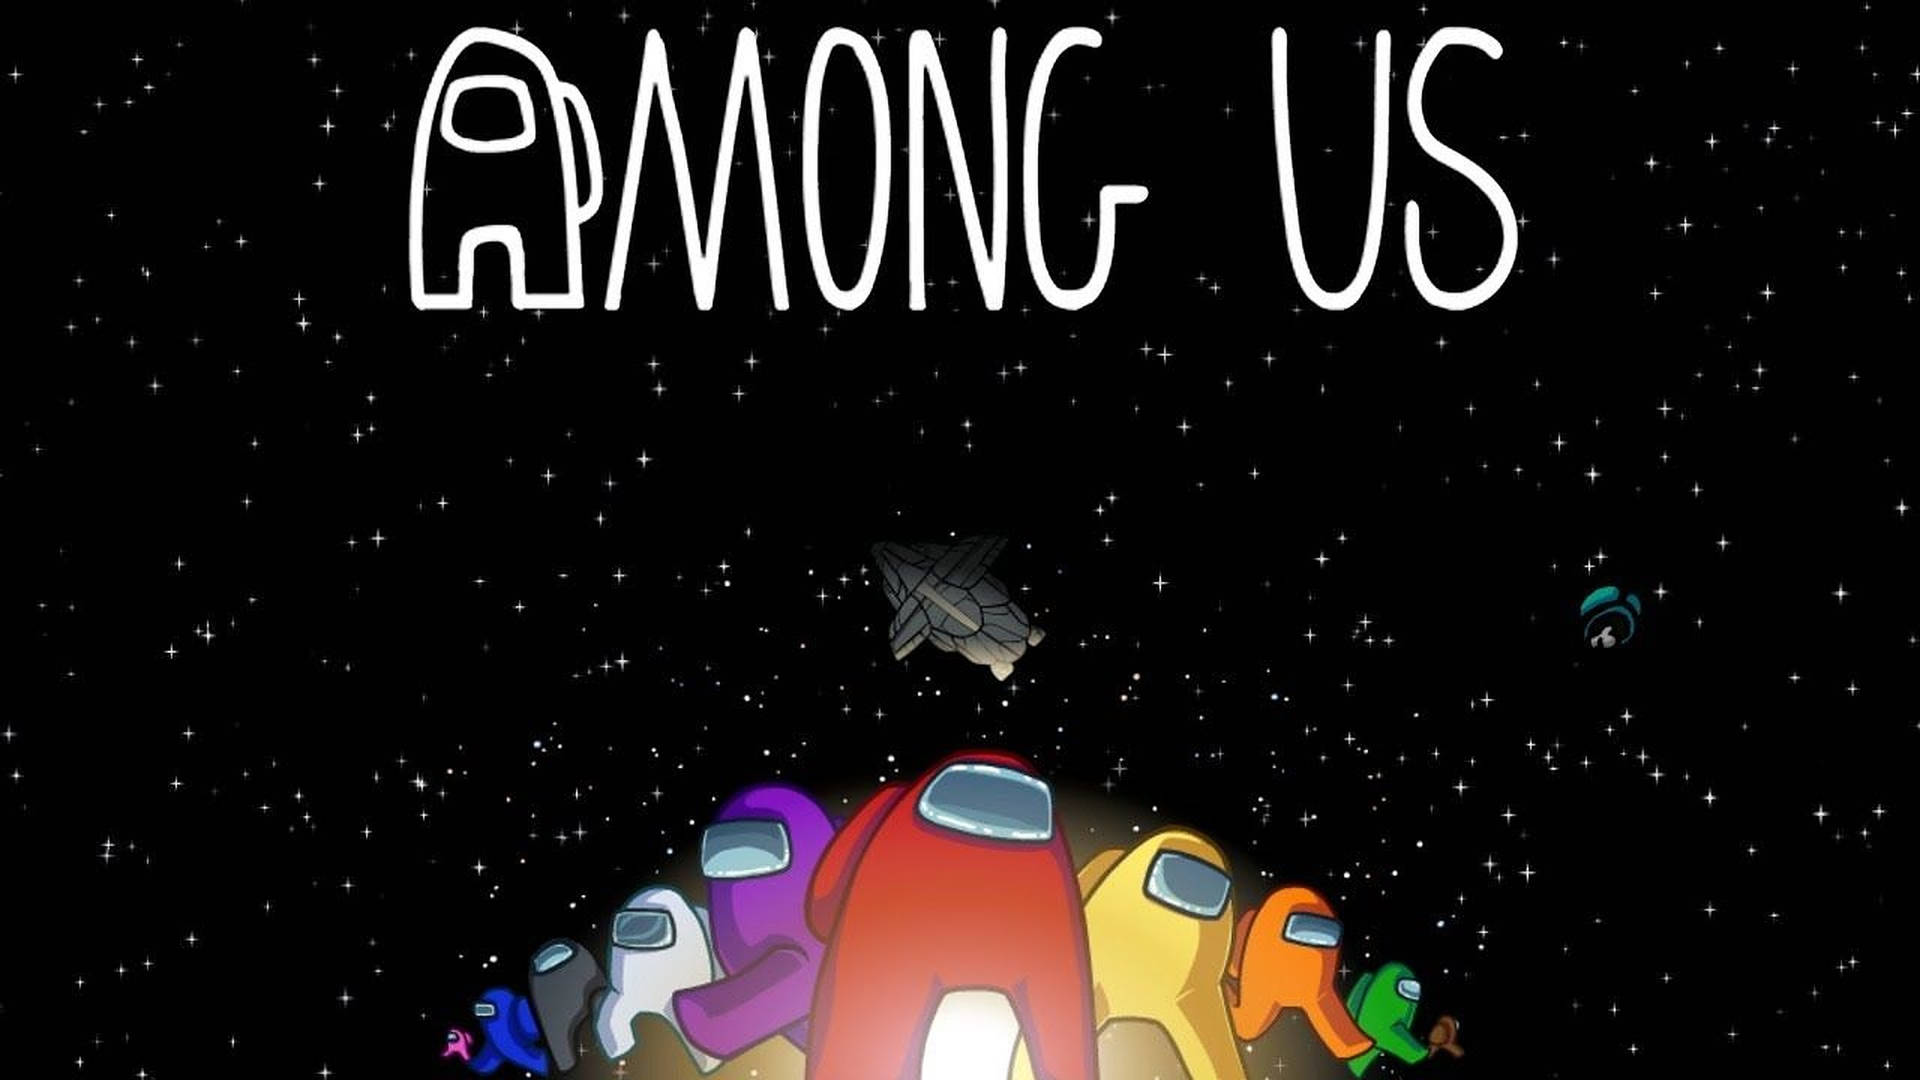 Among Us Space Poster Wallpaper